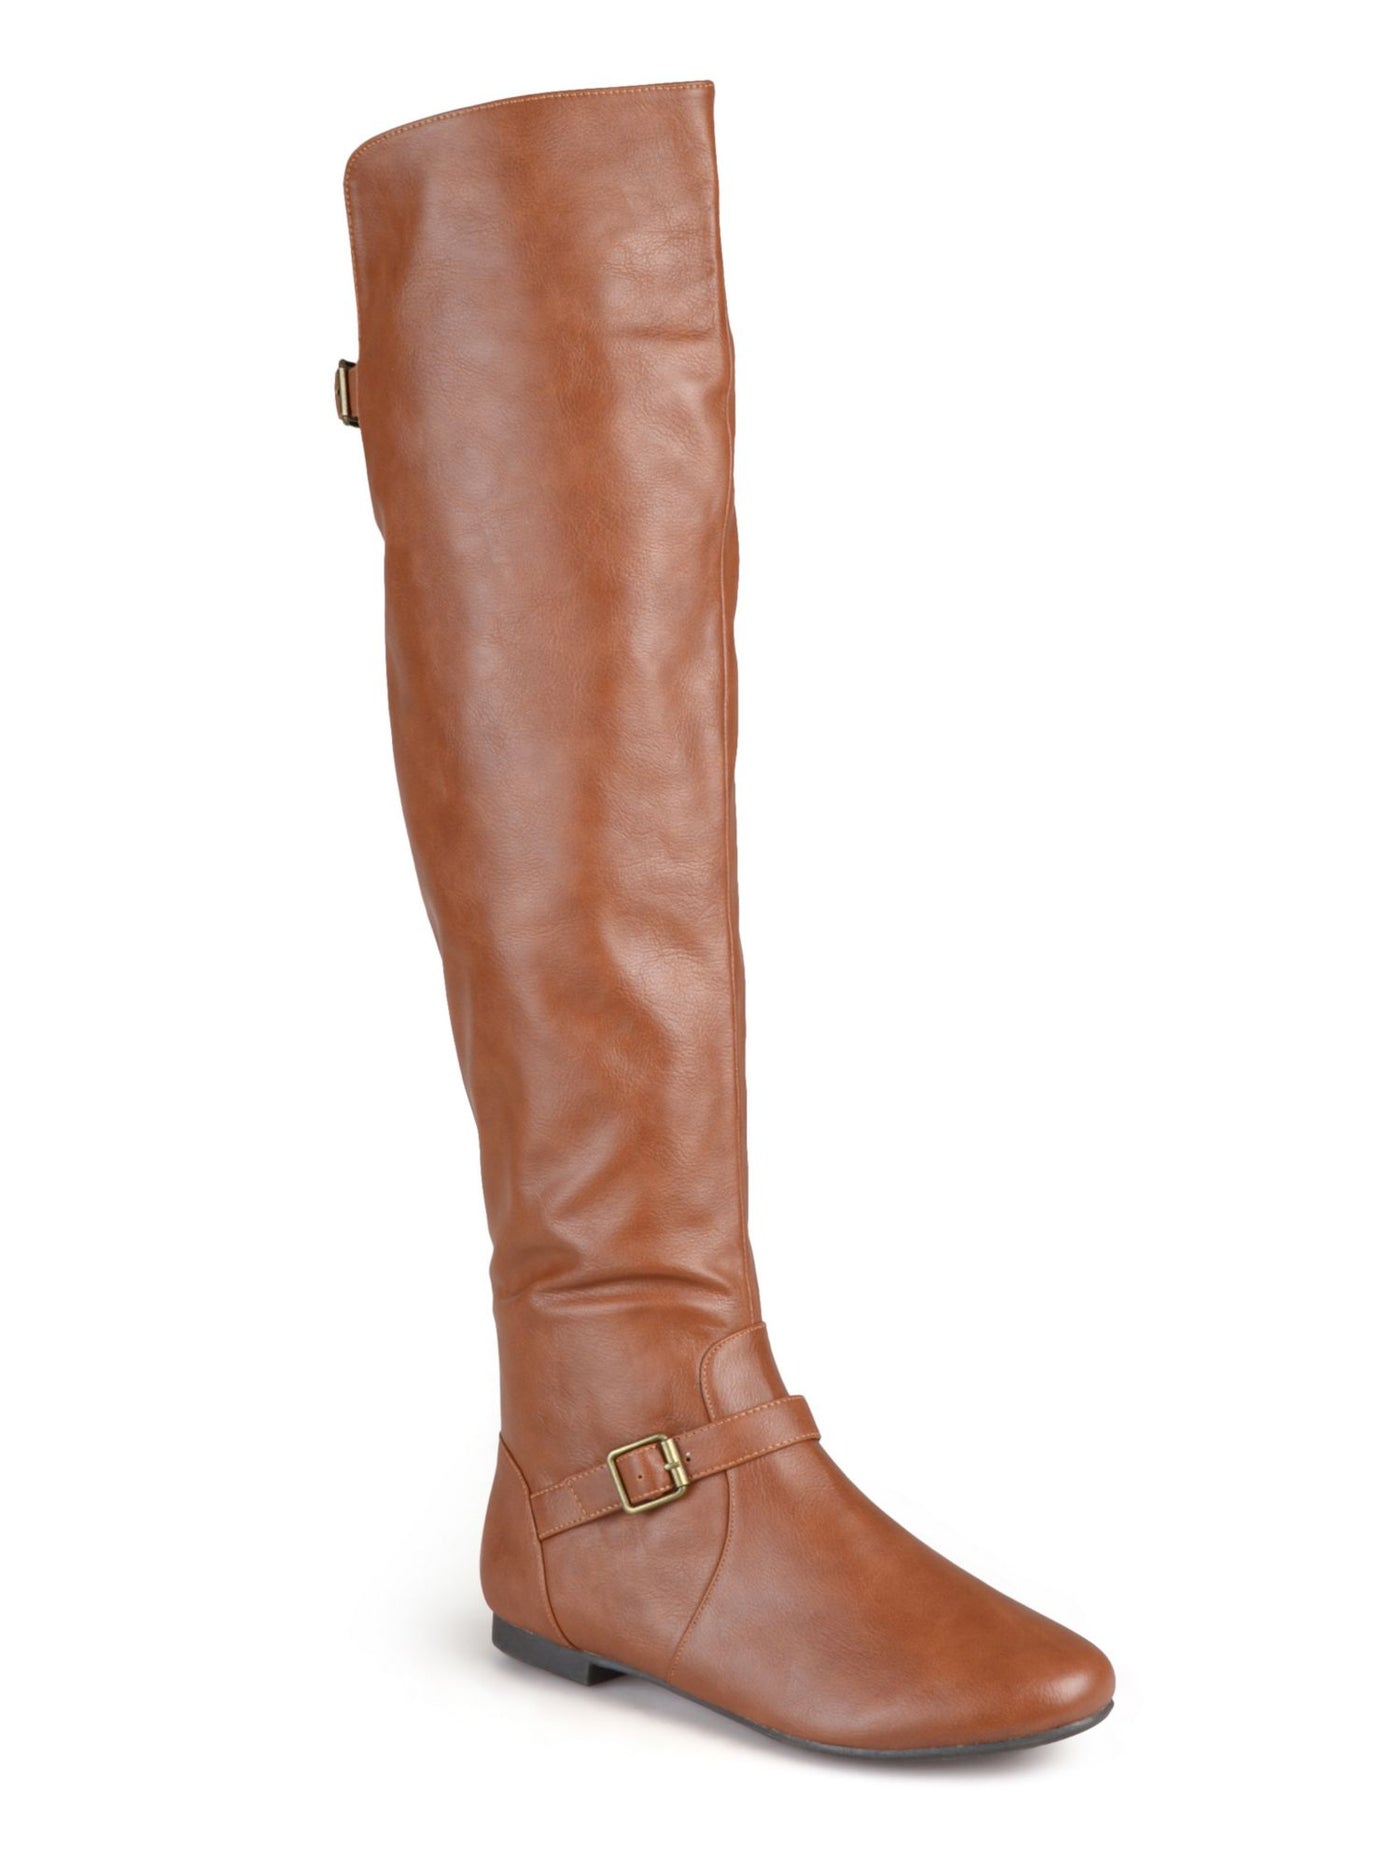 JOURNEE COLLECTION Womens Brown Buckle Accent Comfort Loft Round Toe Zip-Up Riding Boot 7